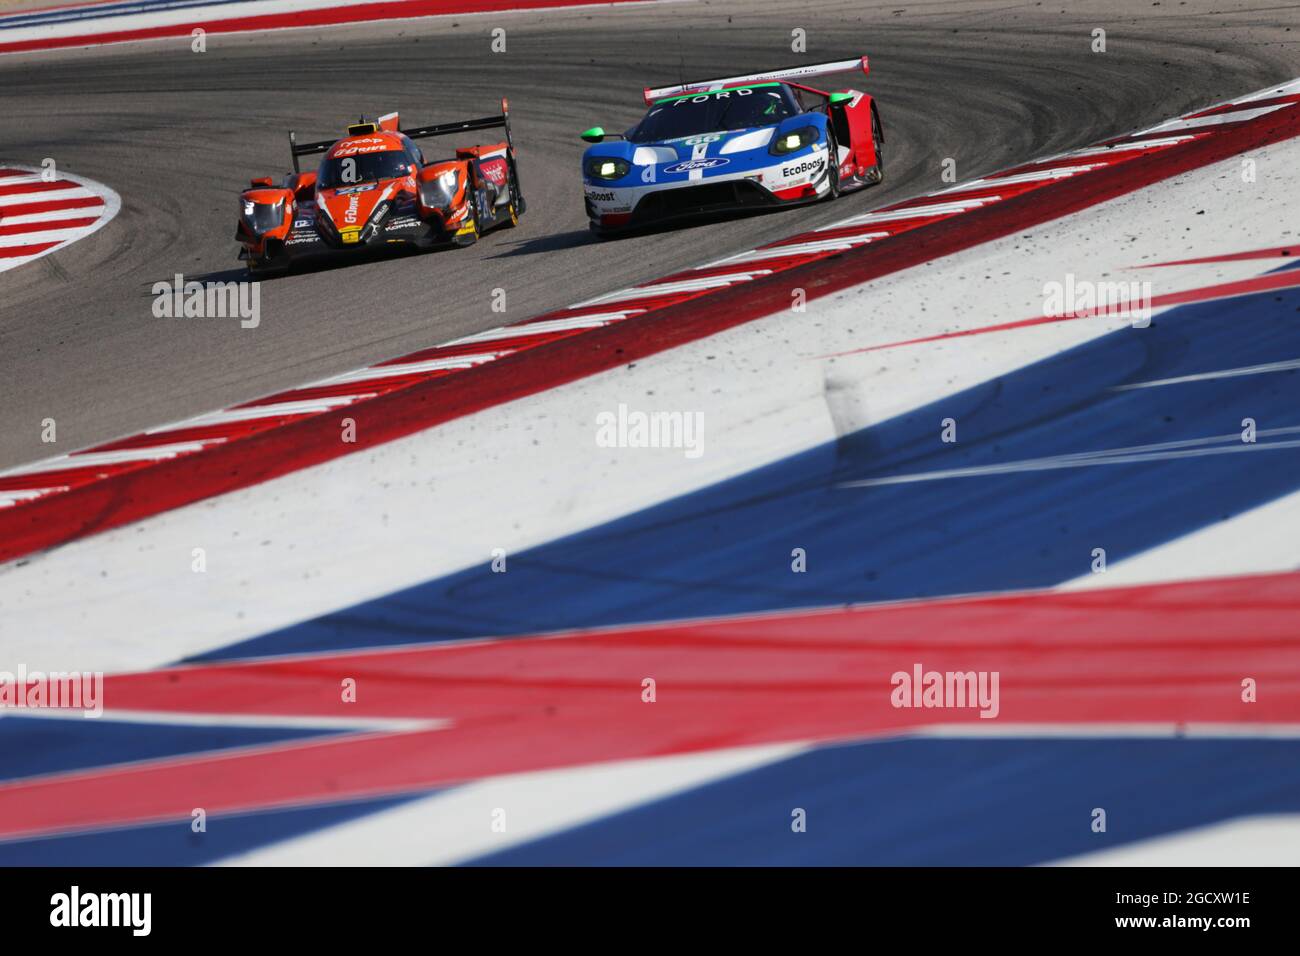 Roman Rusinov (RUS) / Pierre Thiriet (FRA) / Alex Lynn (GBR) #26 G-Drive Racing Oreca 07 Gibson and Stefan Mucke (GER) / Oliver Pla (FRA) #66 Ford Chip Ganassi Team UK Ford GT. FIA World Endurance Championship, Rd 6, 6 Hours of Circuit of the Americas. Saturday 16th September 2017. Austin, Texas, USA. Stock Photo